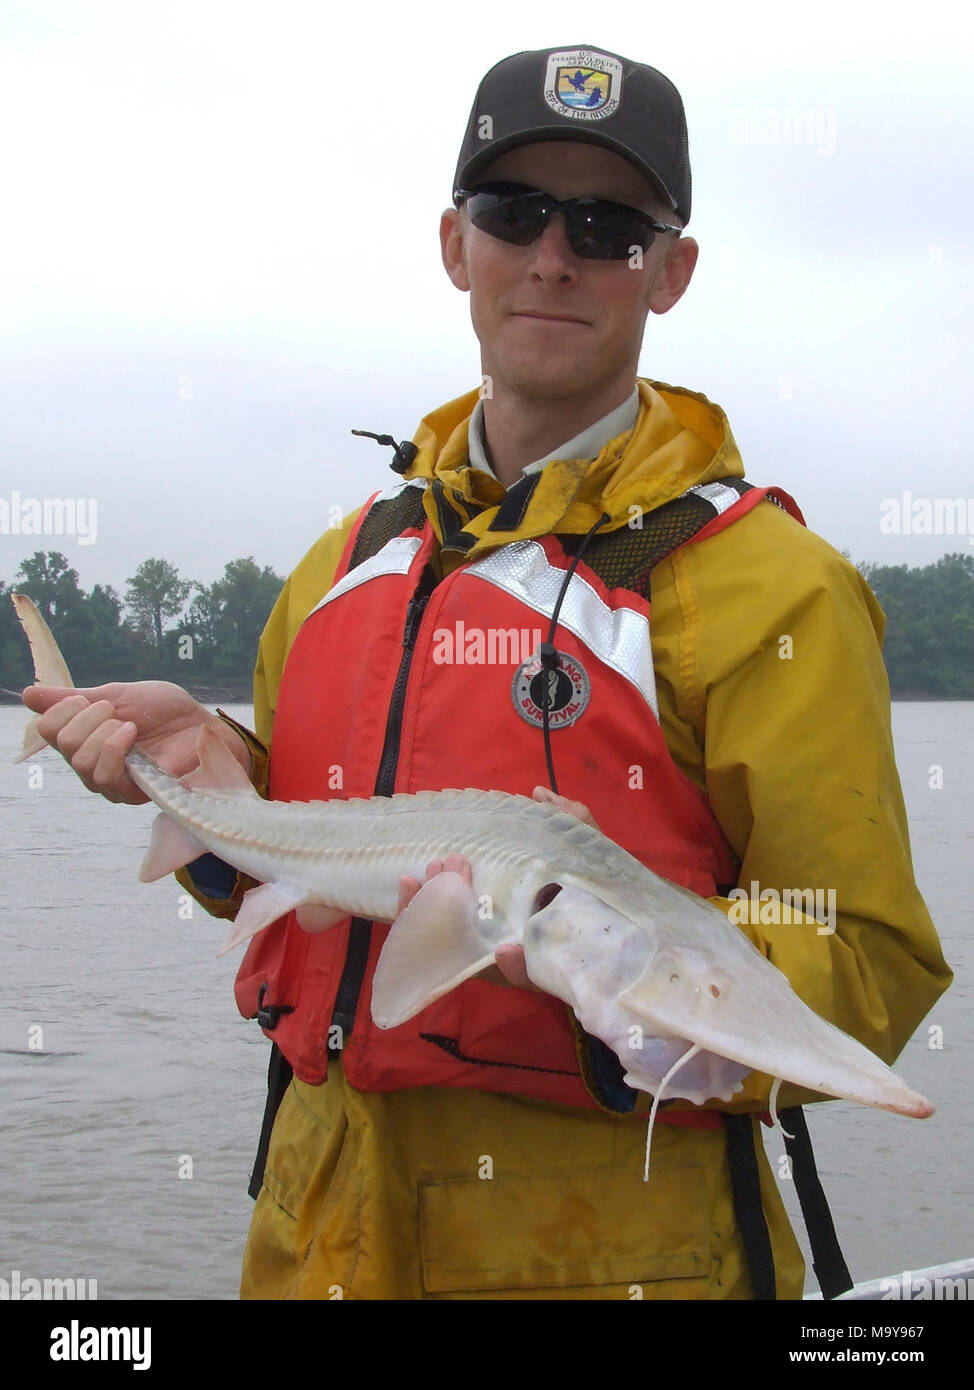 Eye of the beholder. U.S. Fish and Wildlife Service biological science technician Brett Witte shows the distinctive coloring, body shape and long, flat snout of an endangered pallid sturgeon. Before the Missouri River was dammed and straightened, it once teemed with these fish. (USFWS) Stock Photo